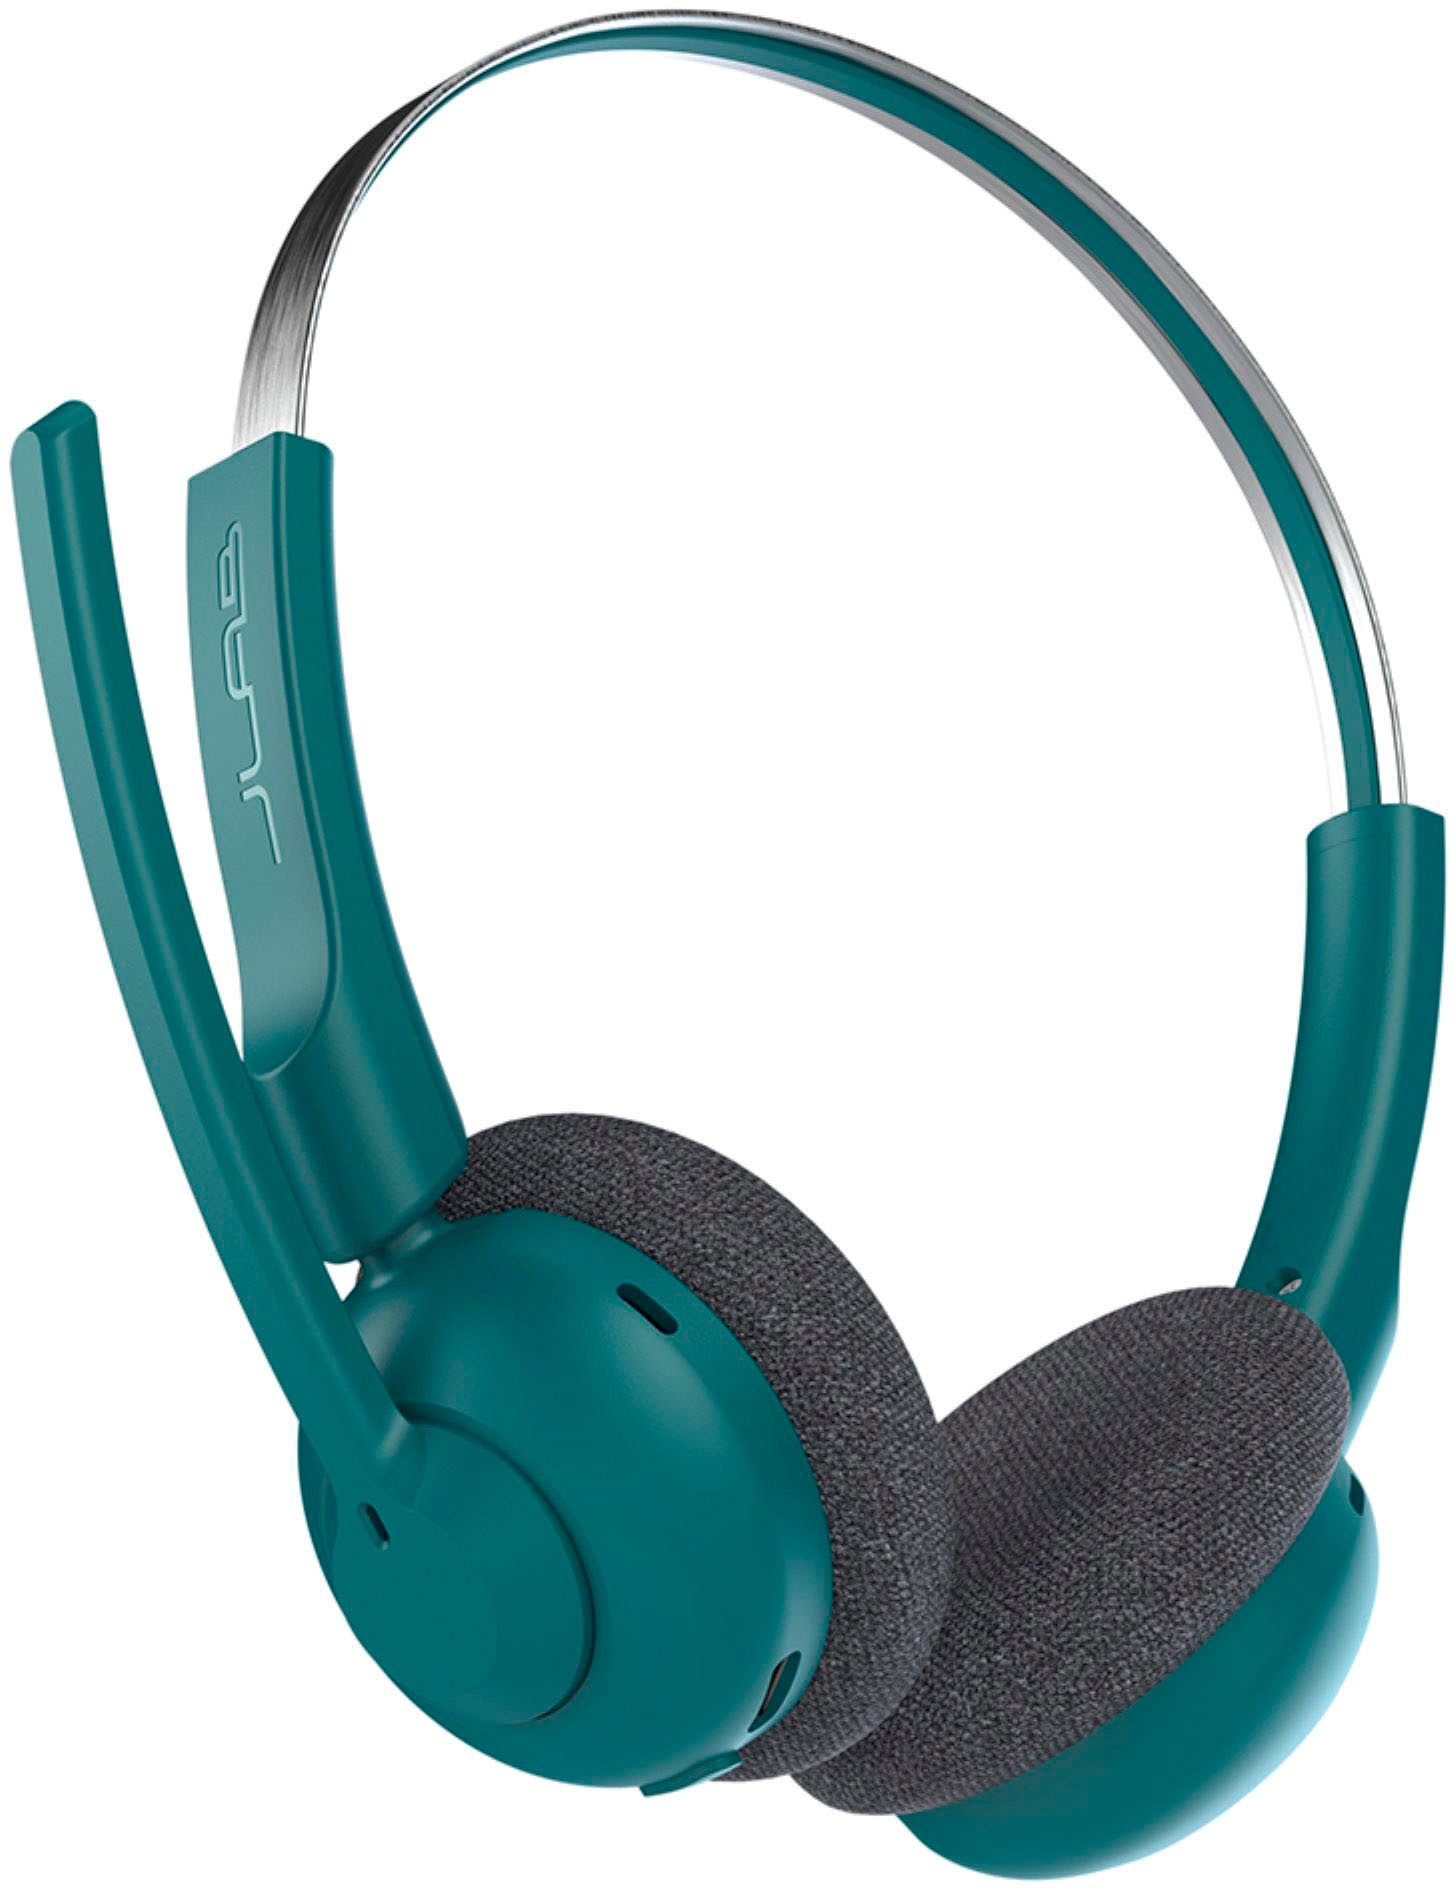 Left View: Logitech - Zone 300 Wireless Bluetooth On-ear Headset With Noise-Canceling Microphone - Black